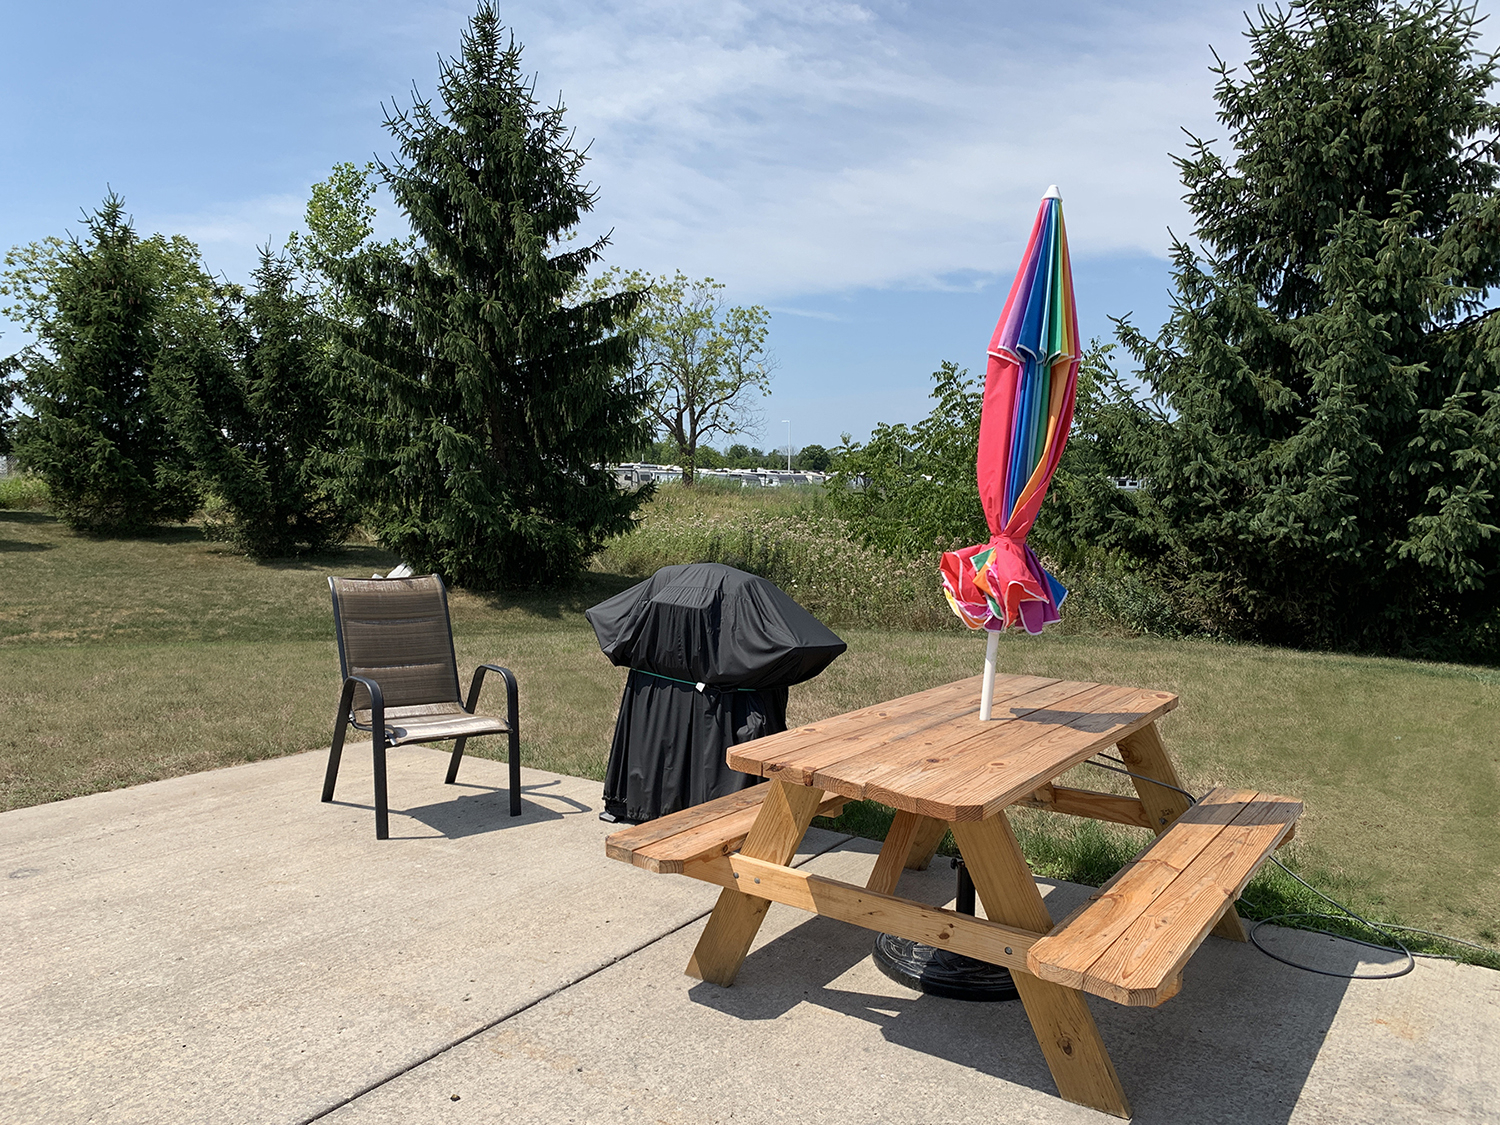 EHR Dale Picnic Table